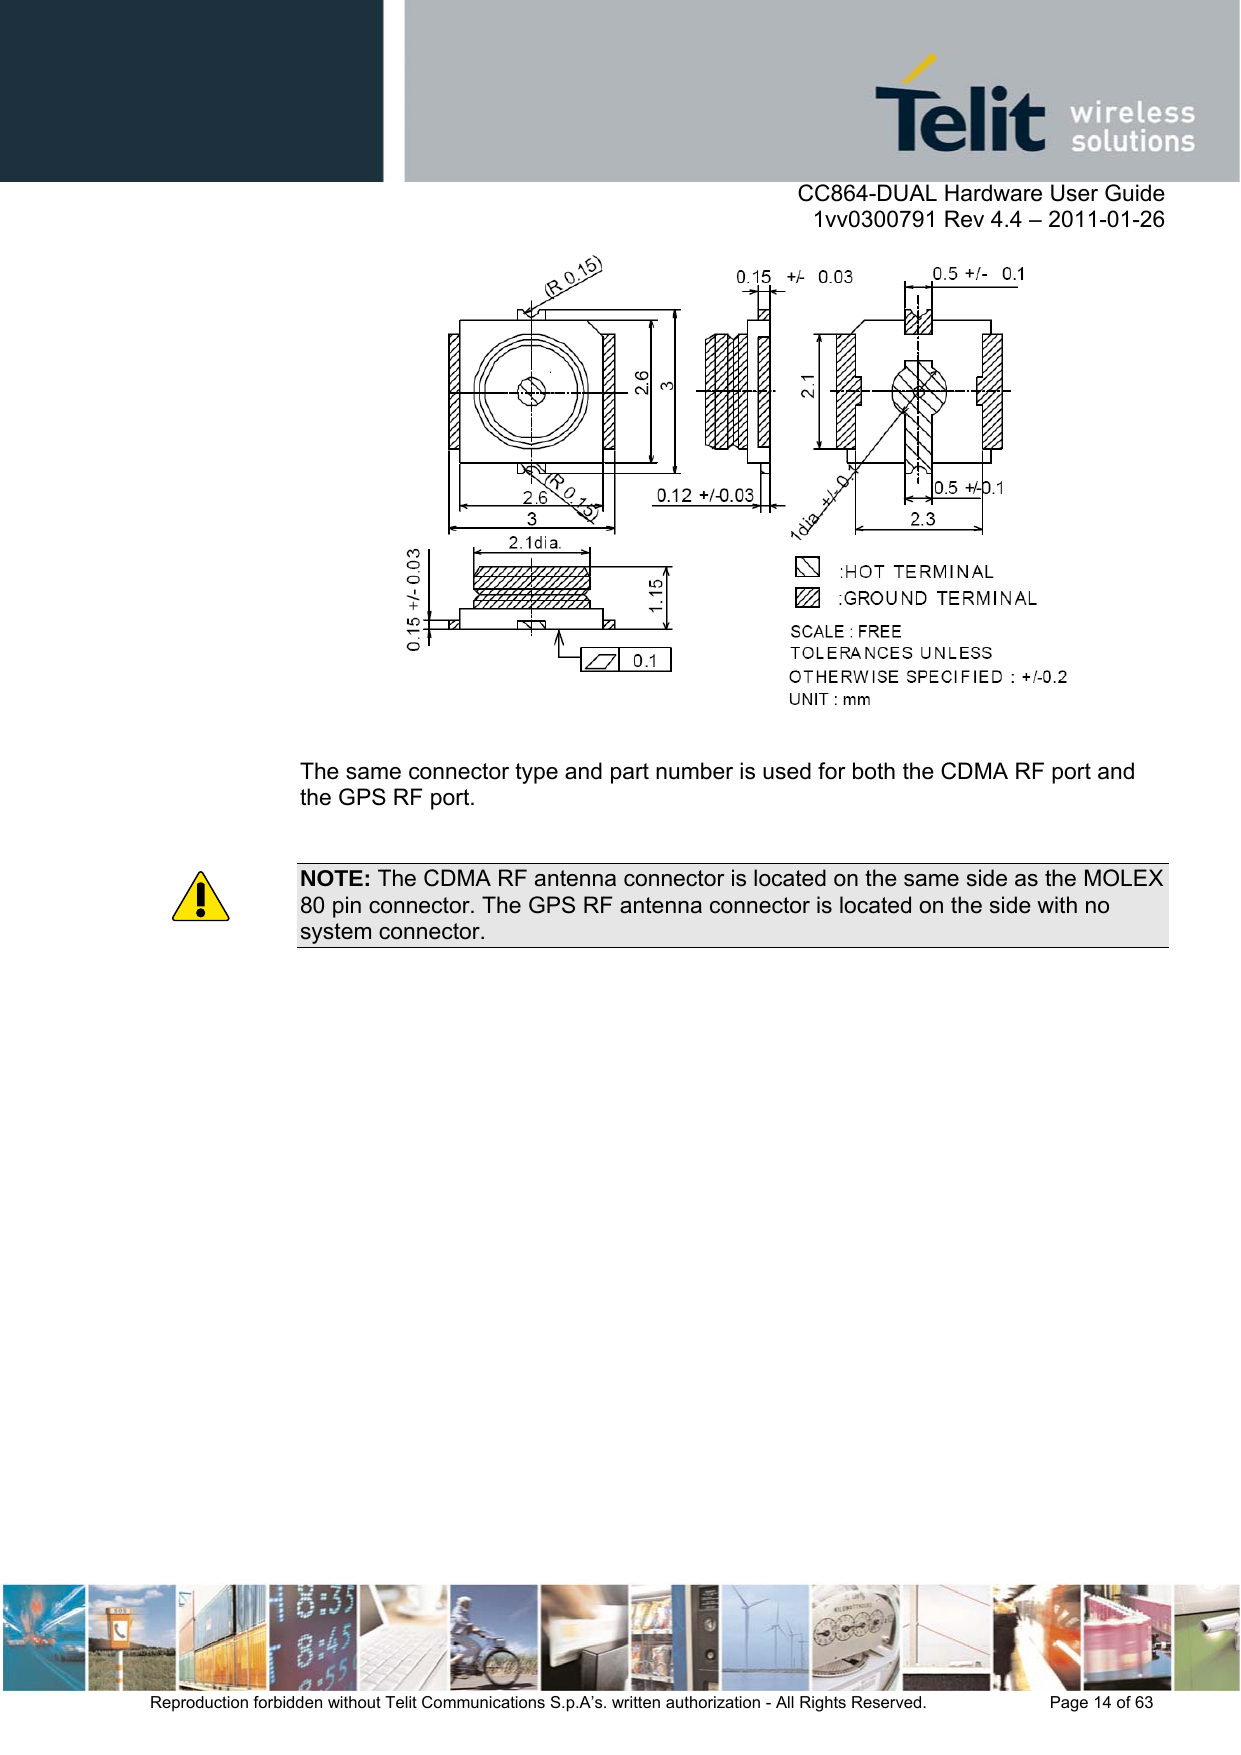      CC864-DUAL Hardware User Guide    1vv0300791 Rev 4.4 – 2011-01-26  Reproduction forbidden without Telit Communications S.p.A’s. written authorization - All Rights Reserved.    Page 14 of 63    The same connector type and part number is used for both the CDMA RF port and the GPS RF port.  NOTE: The CDMA RF antenna connector is located on the same side as the MOLEX 80 pin connector. The GPS RF antenna connector is located on the side with no system connector. 